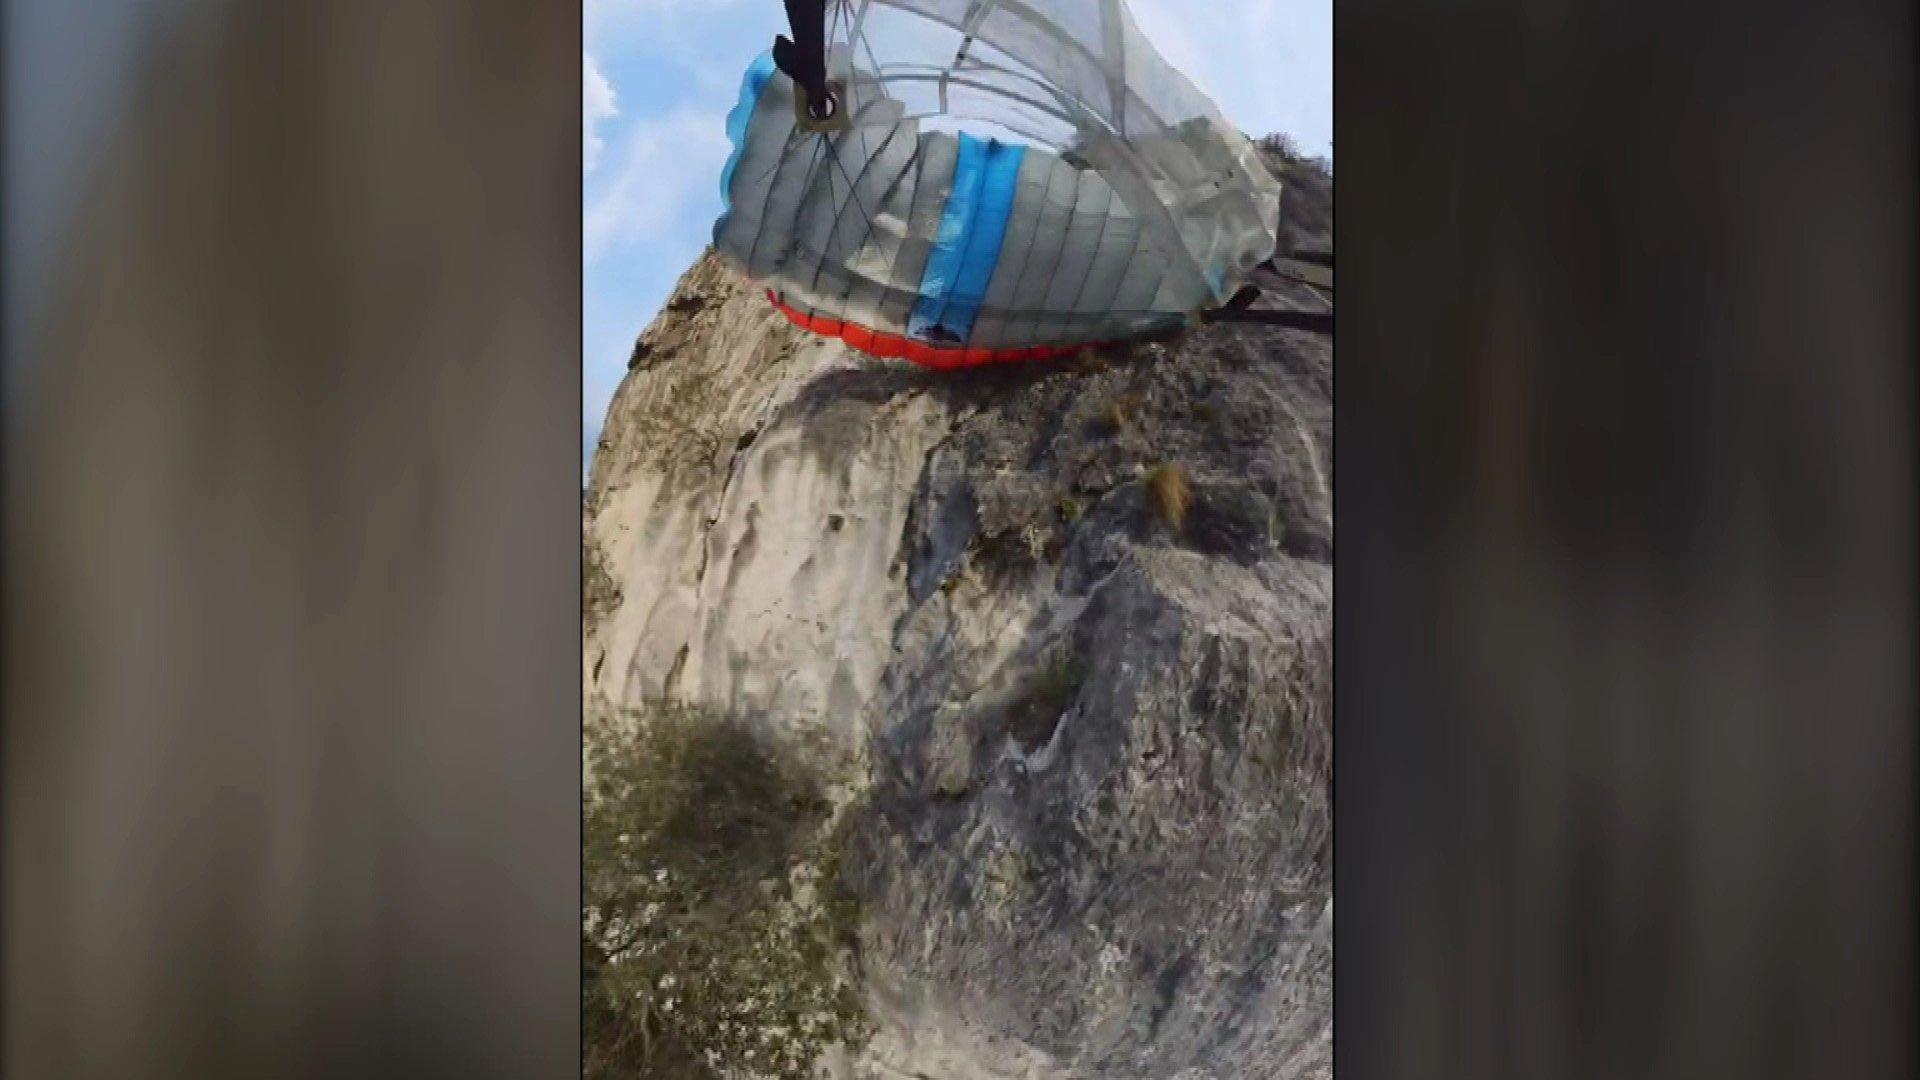 An Australian base jumper has shared footage of the life-threatening moment he gets stuck in a tree.